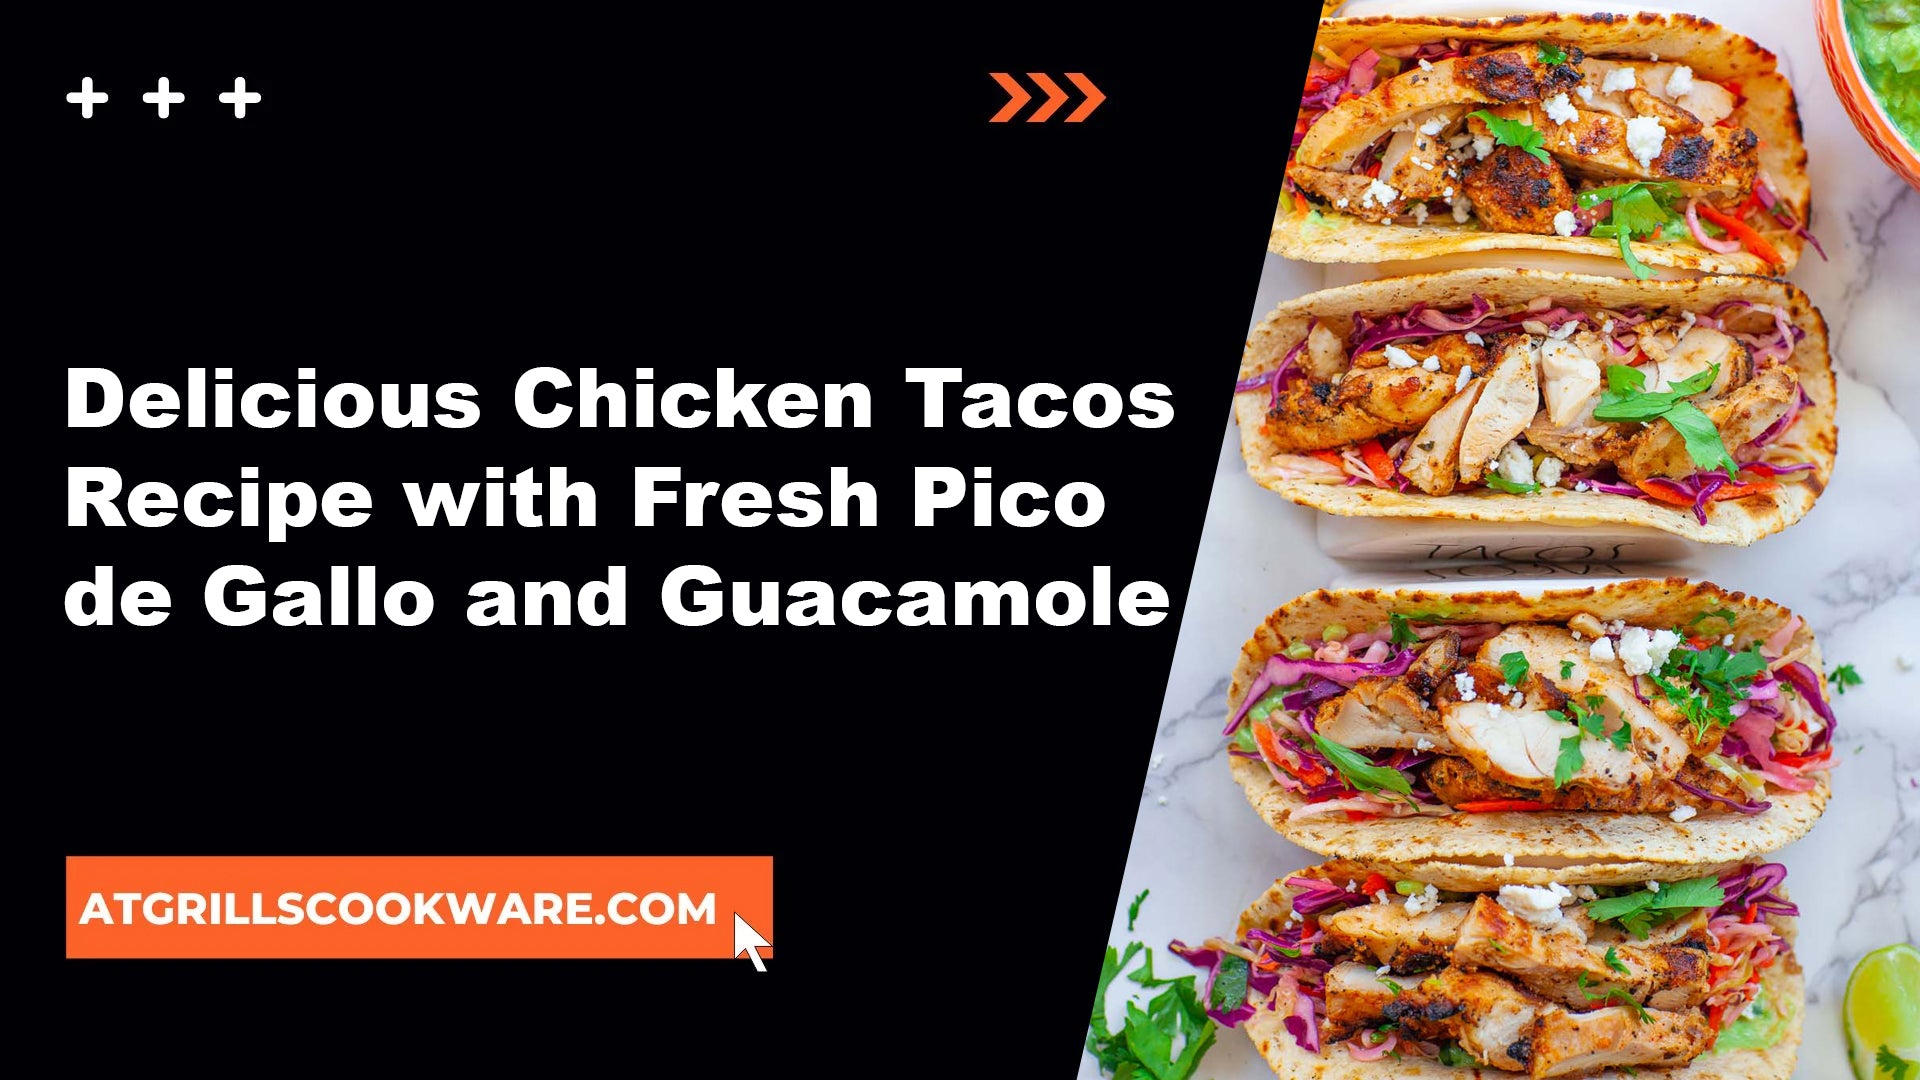 How to Make Flavorful Chicken Tacos with Fresh Pico de Gallo and Guacamole